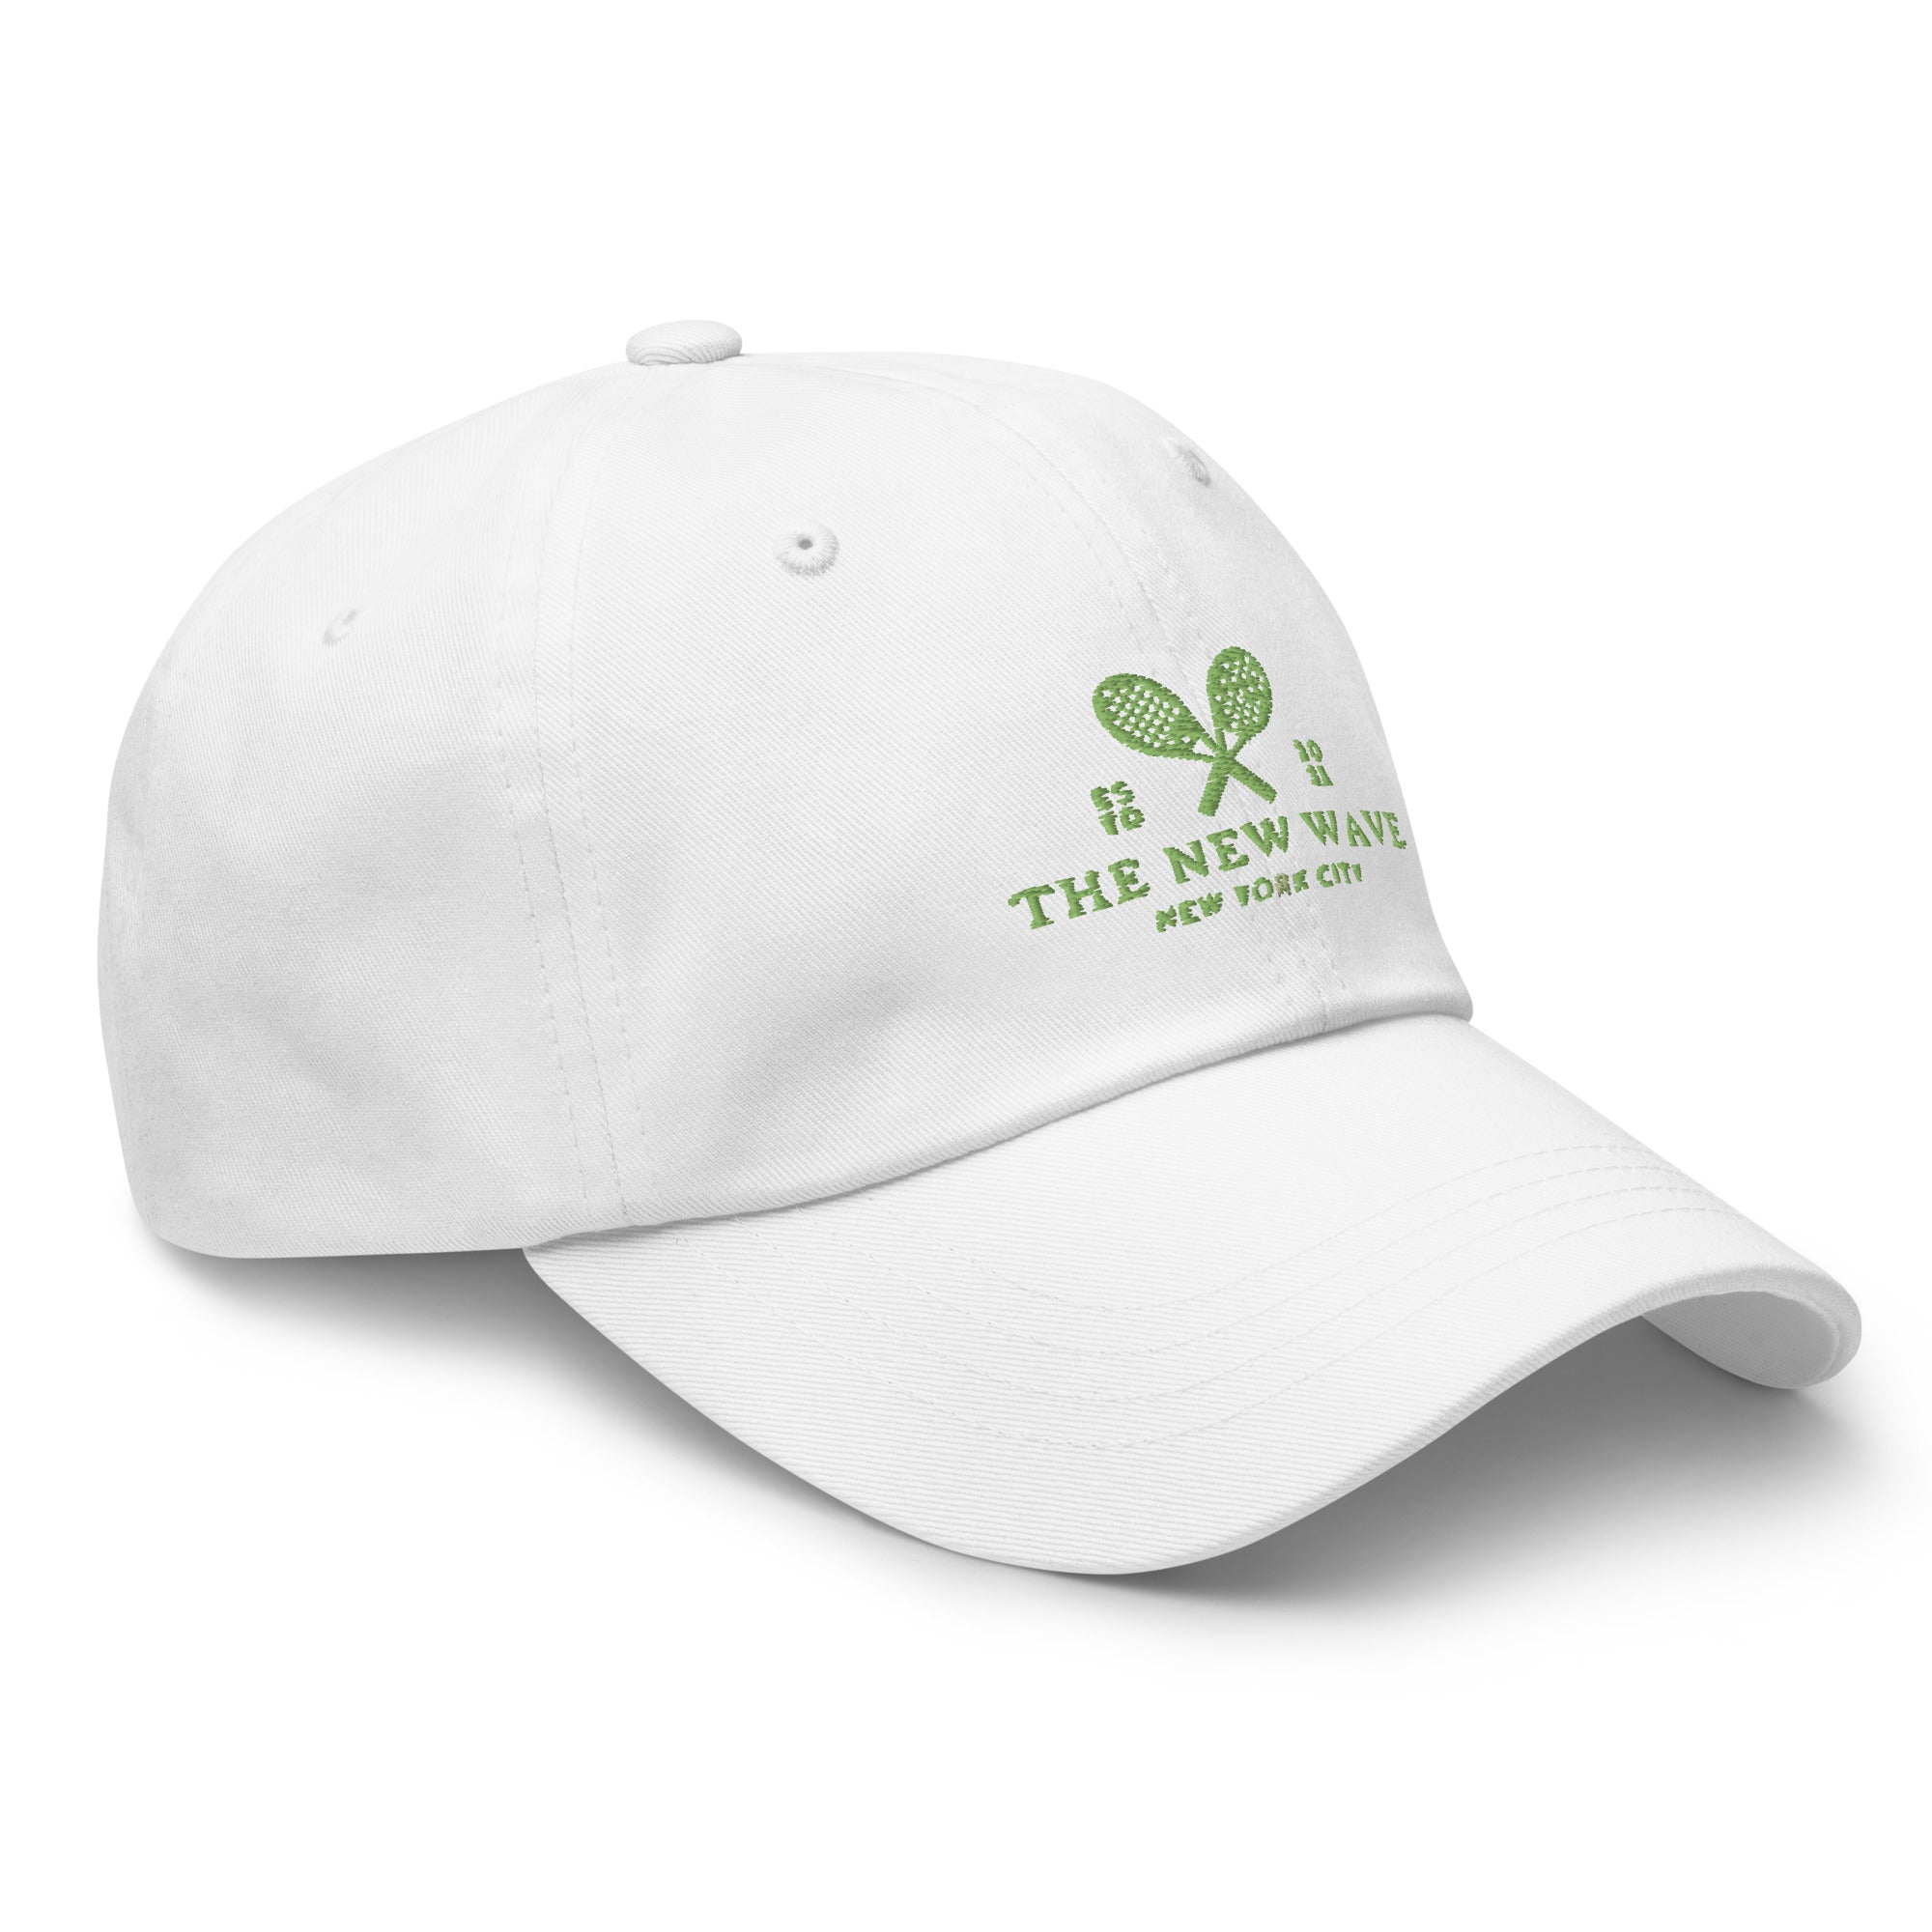 Tennis Club Cap - The New Wave NYC